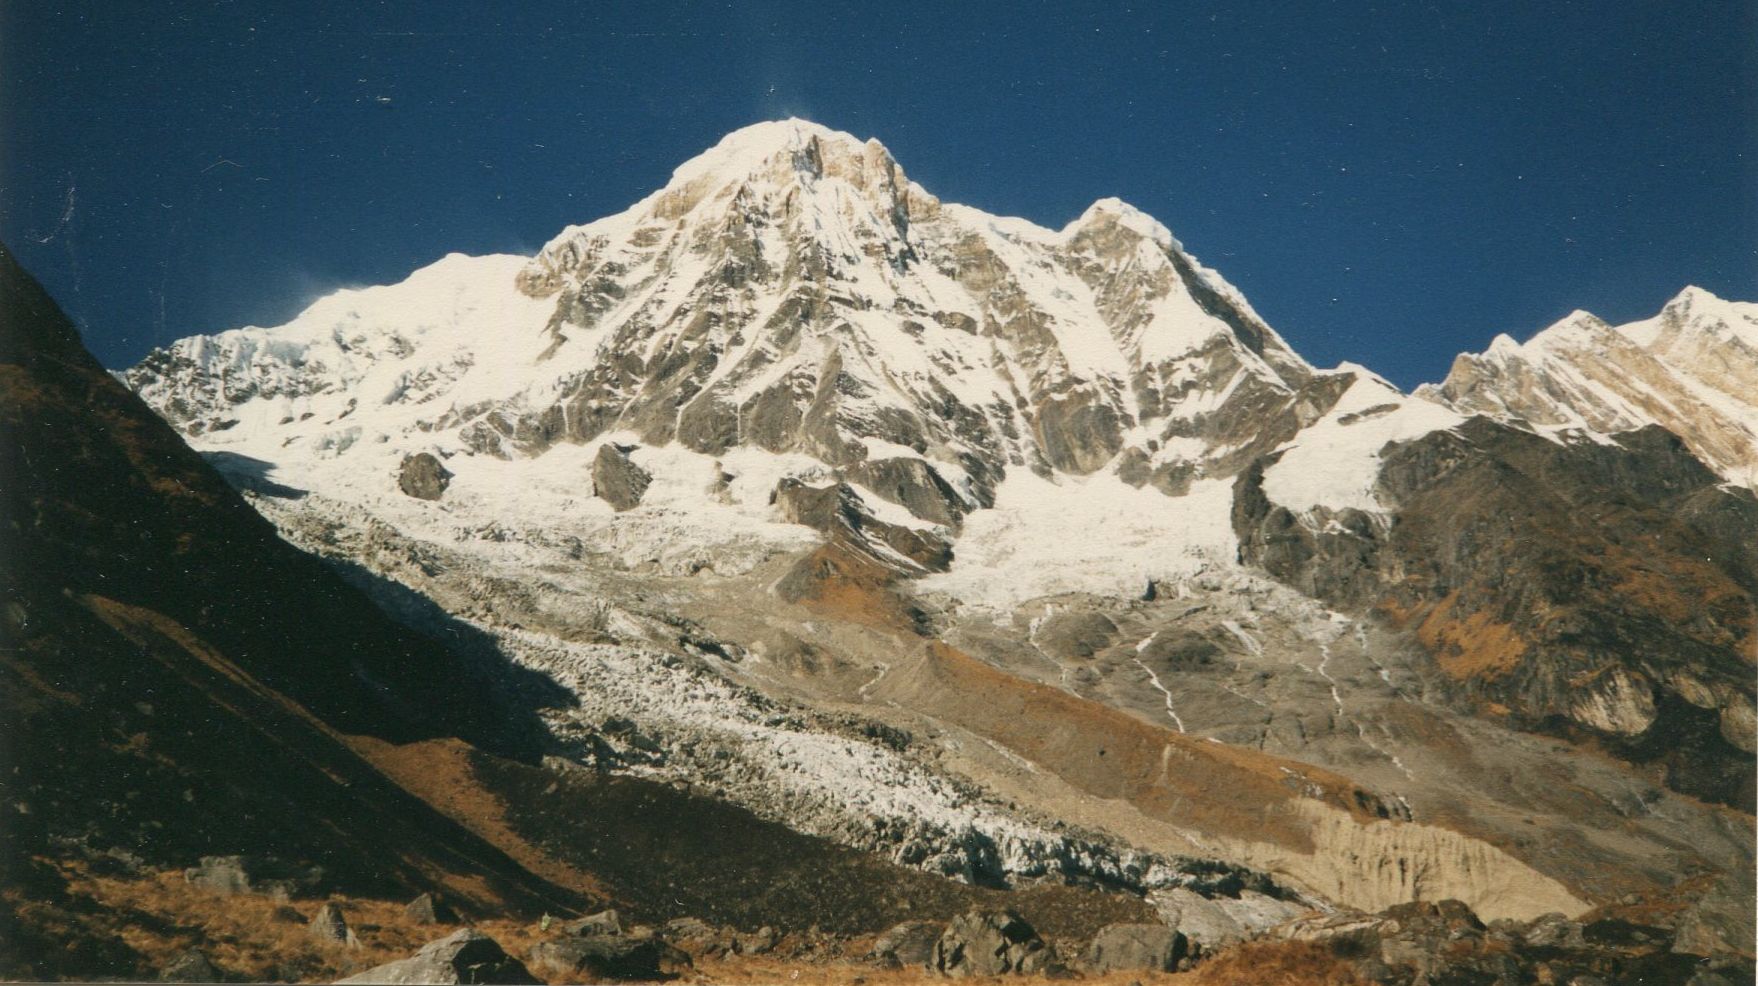 Annapurna South Peak on approach to the Sanctuary